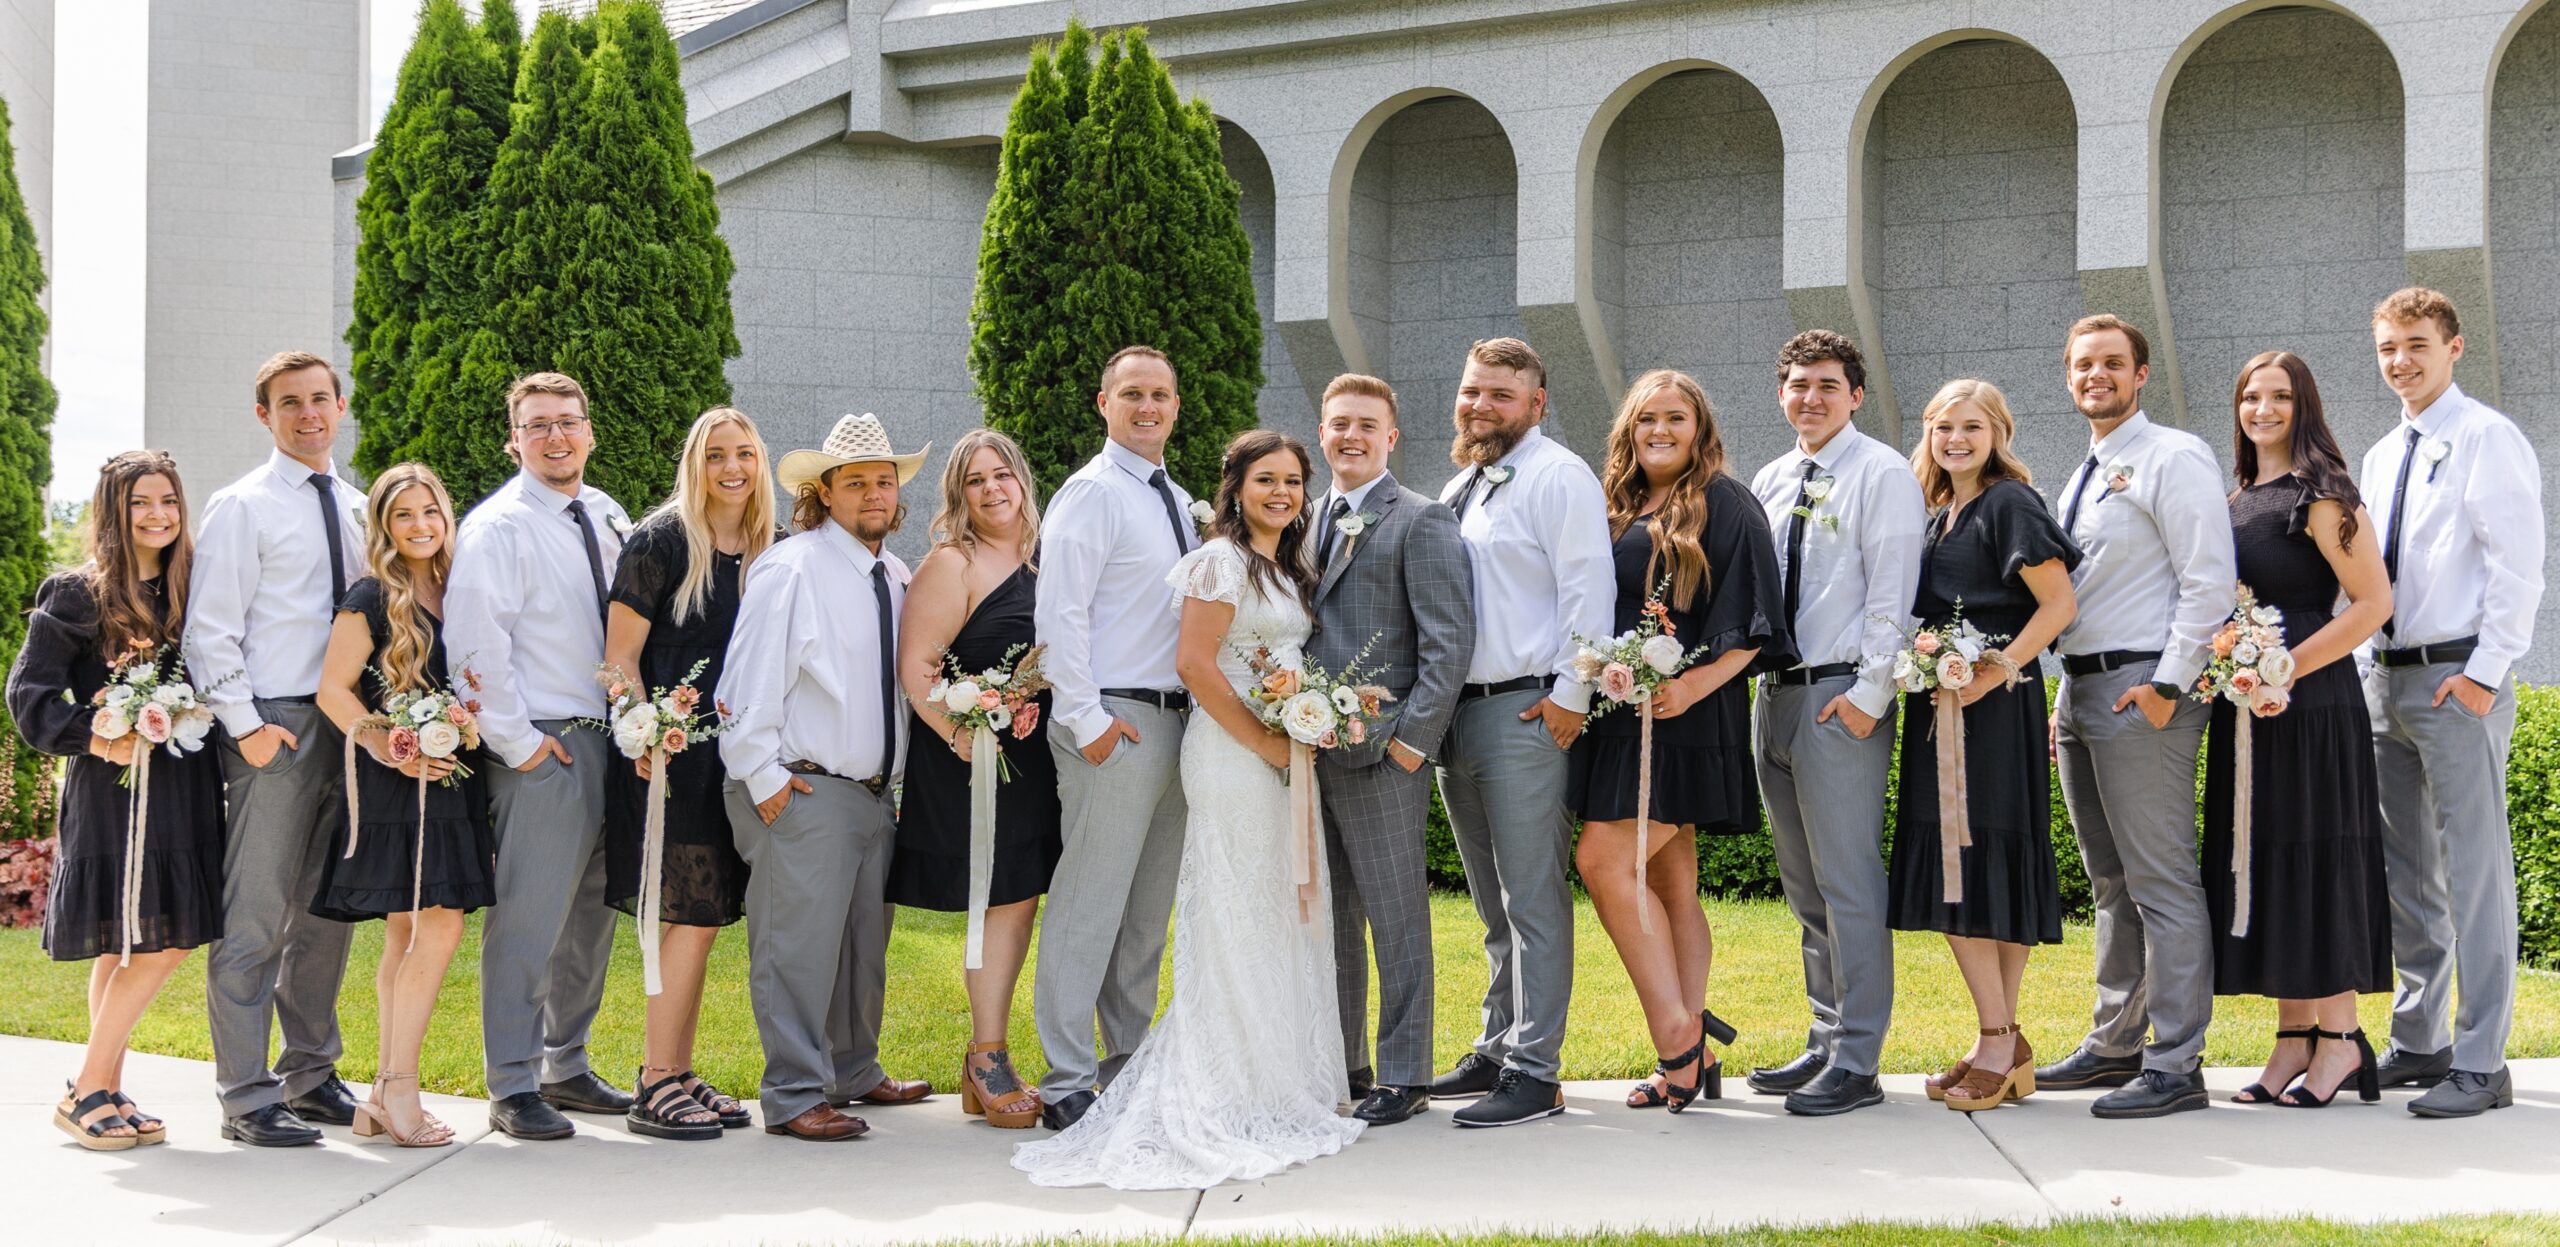 black and white bridal party dress colors